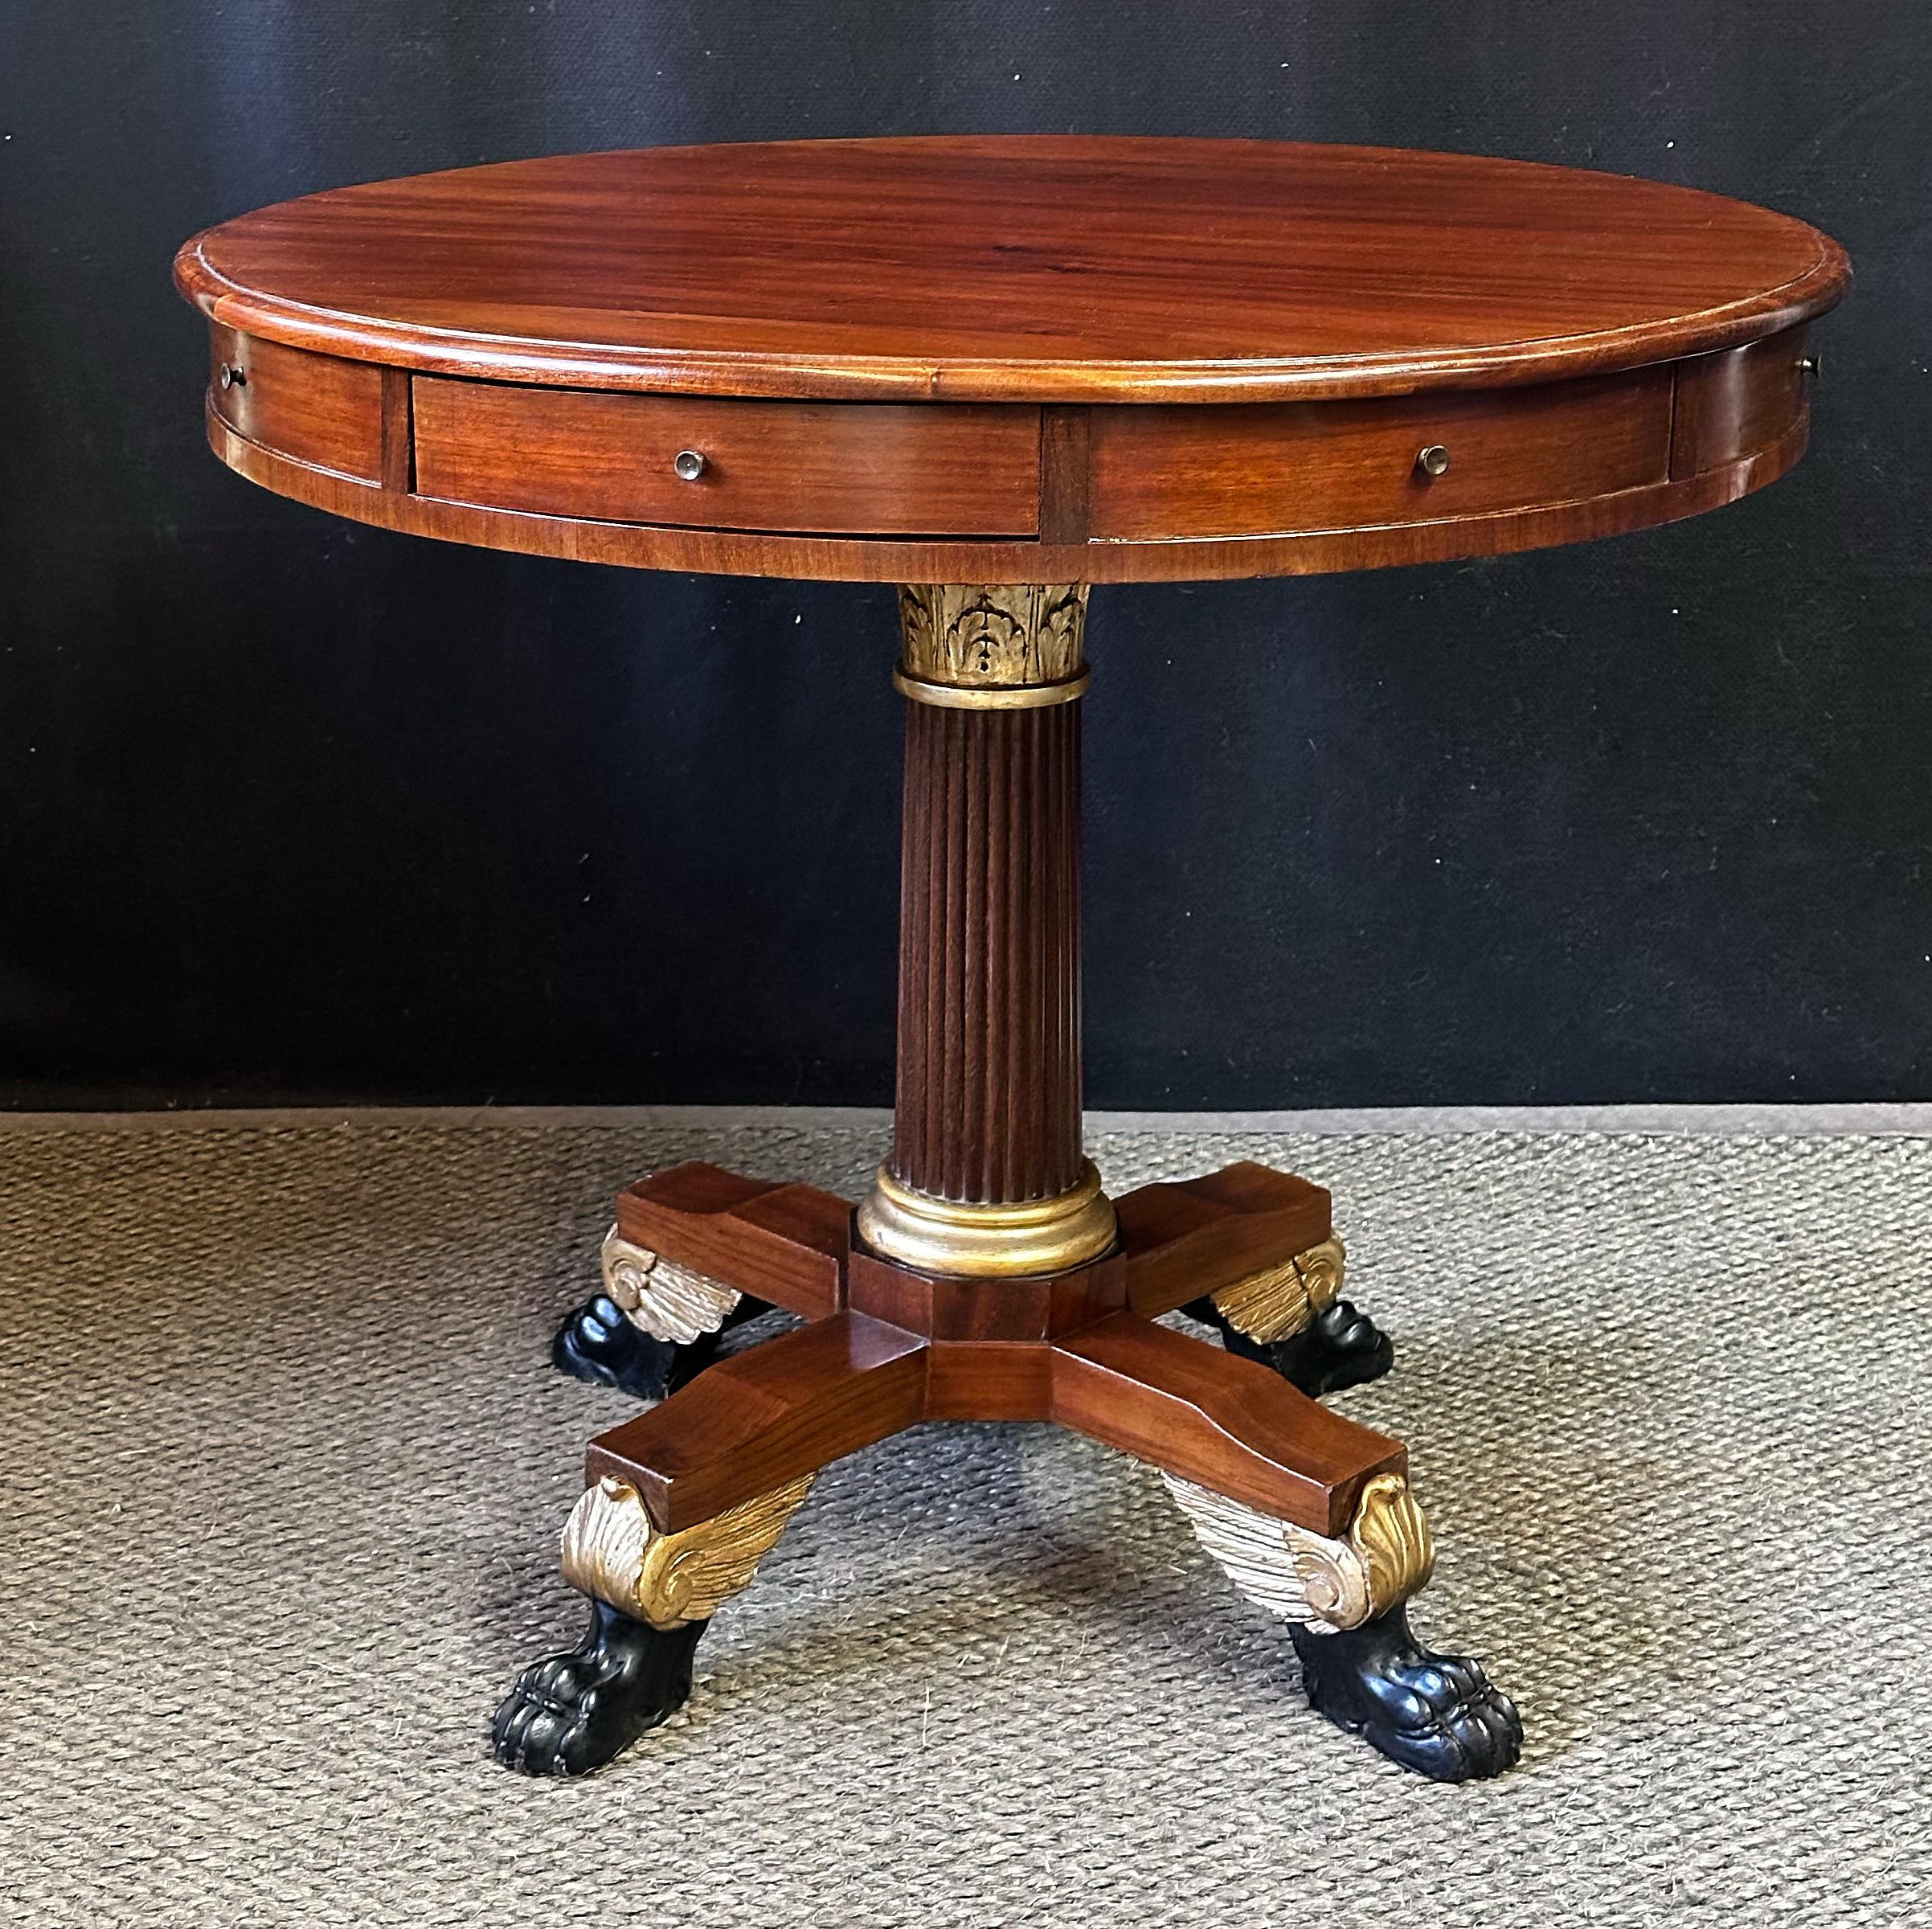 19th Century excellent quality Italian Empire rent or games table of mahogany having a beautifully grained top with beveled edge. The table’s frieze holds four working drawers separated by four faux drawers, all having brass knobs. Supporting the